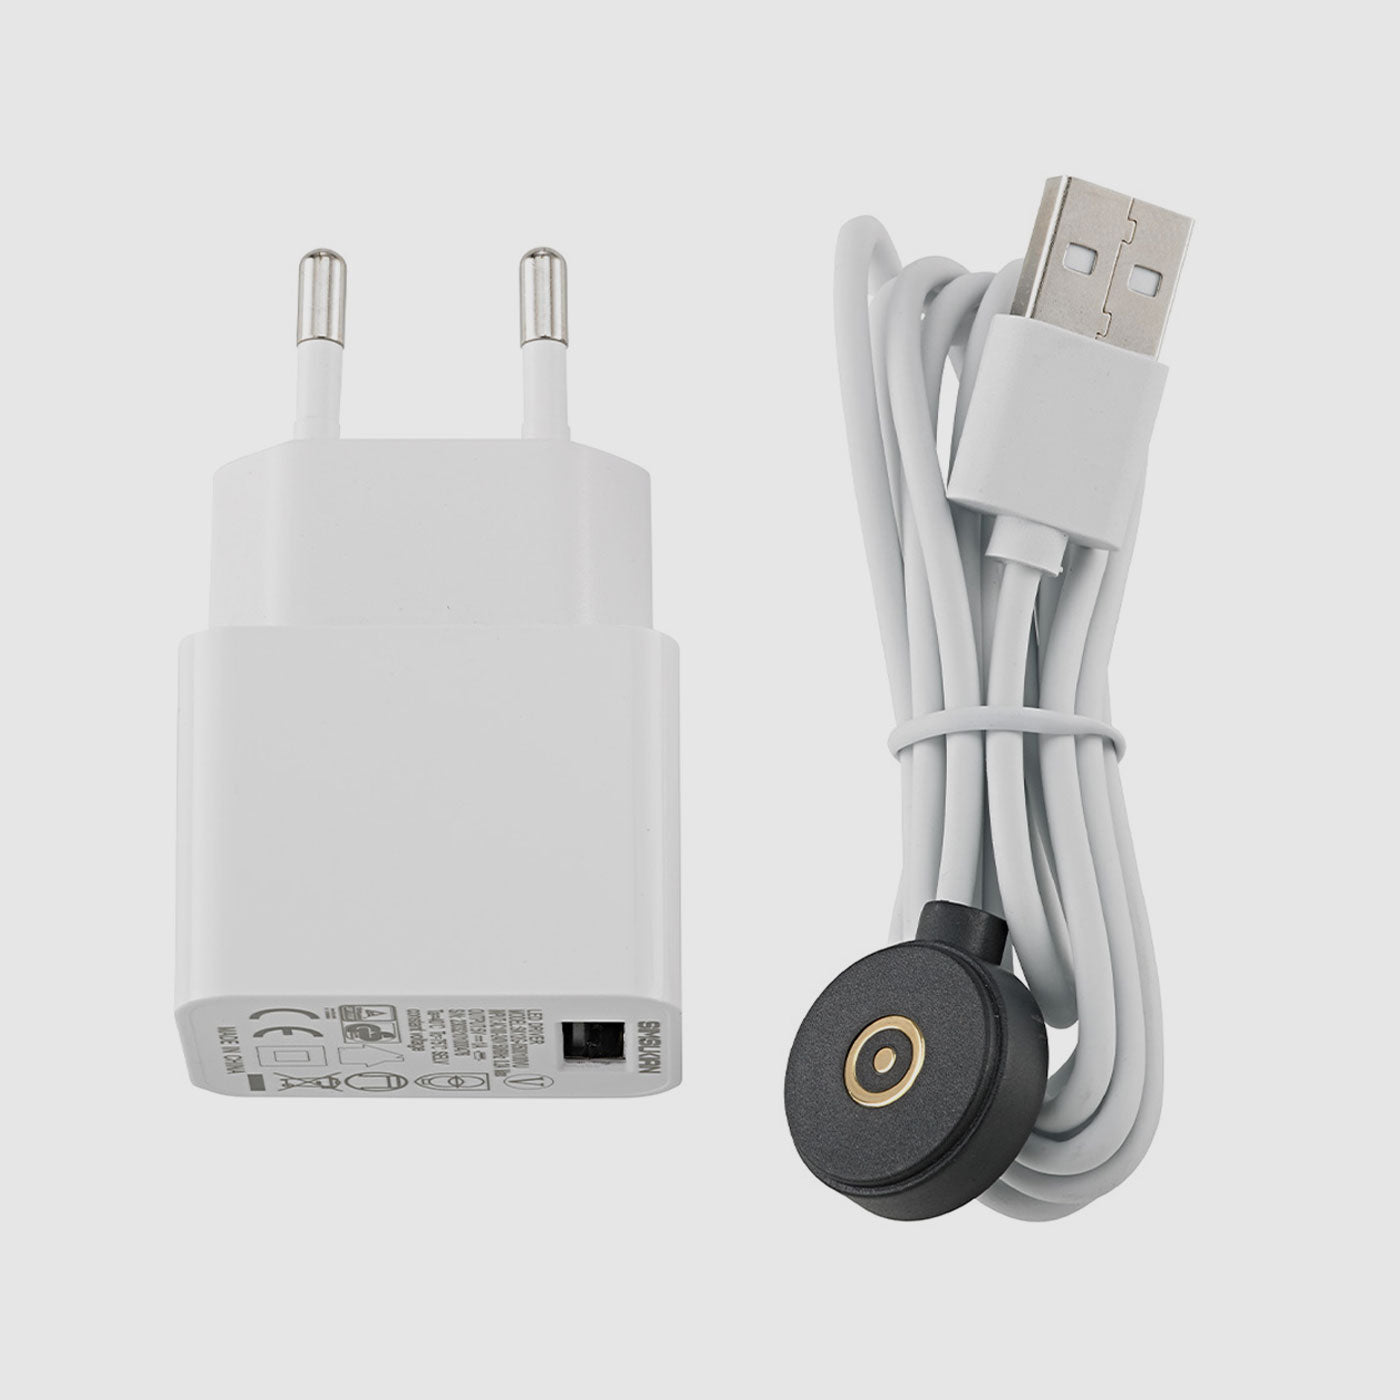 Sigor Nuindie Easy-Connect Pug Ladekabel weiss